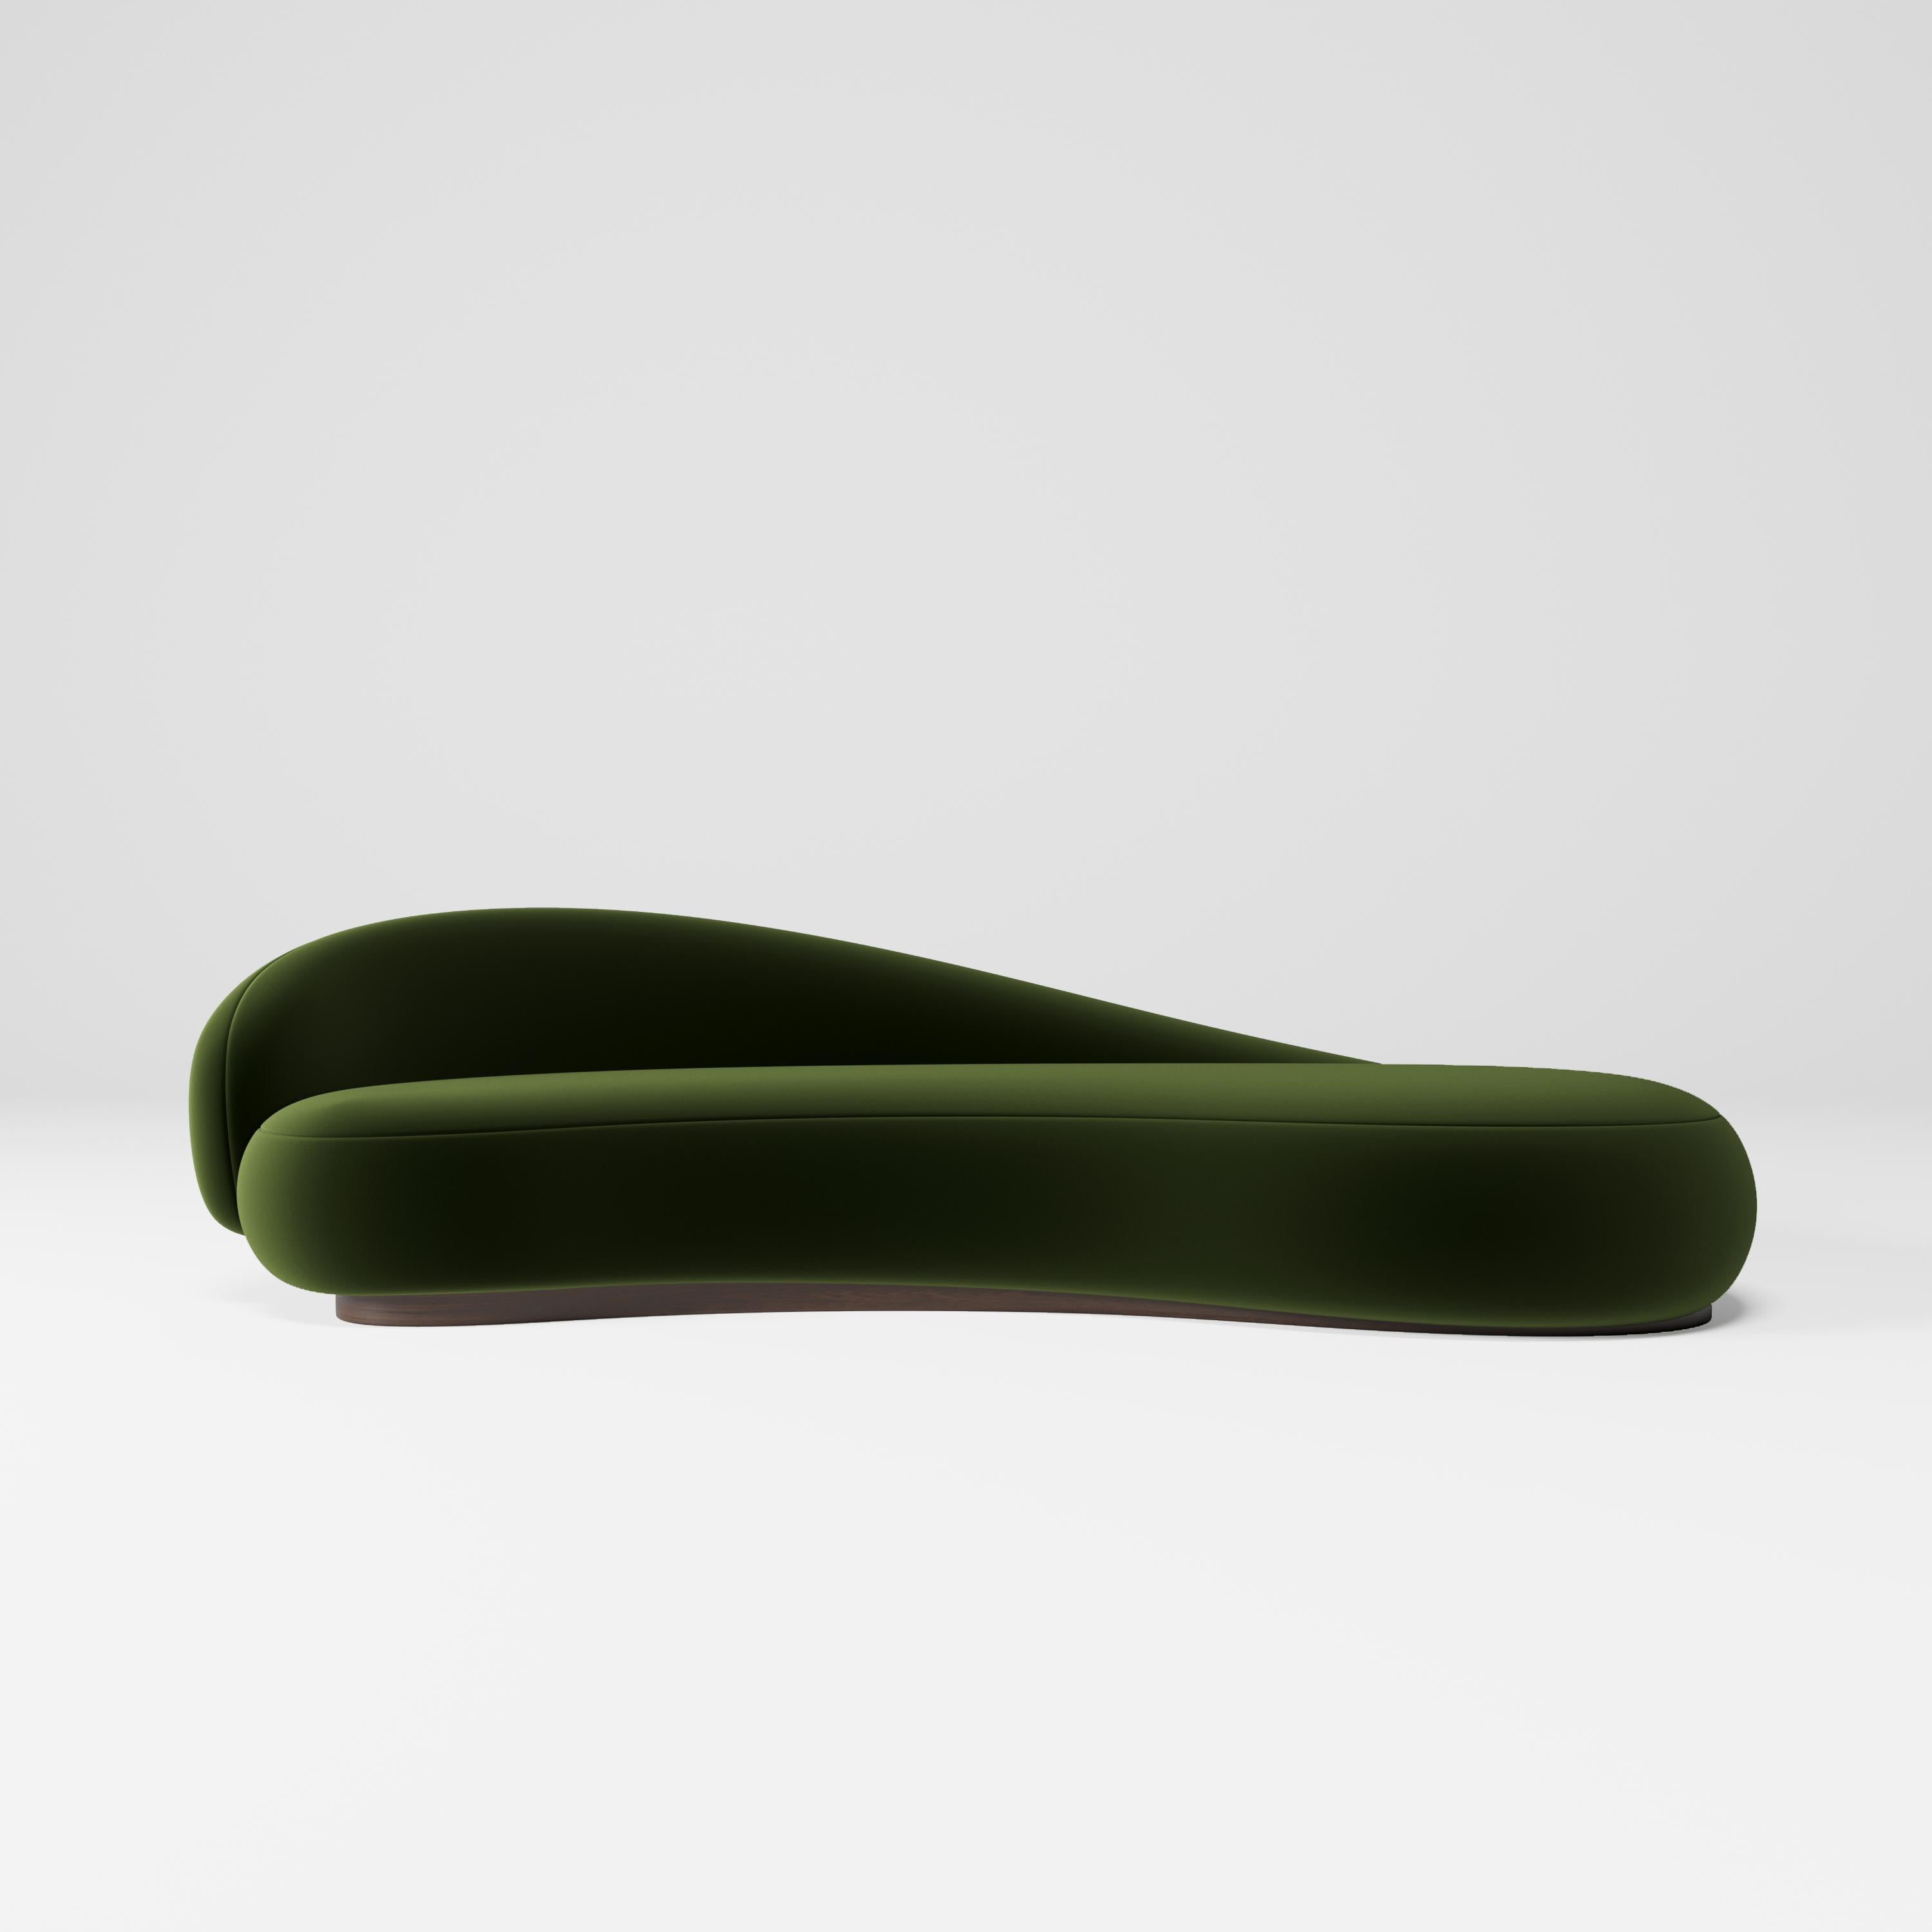 Material information:

Lupa Sofa, which has a flexible velvet fabric that integrates with its organic and curved structure, does not have any lumps or defects in its details. In addition, it provides a long-lasting use with its easy-to-clean